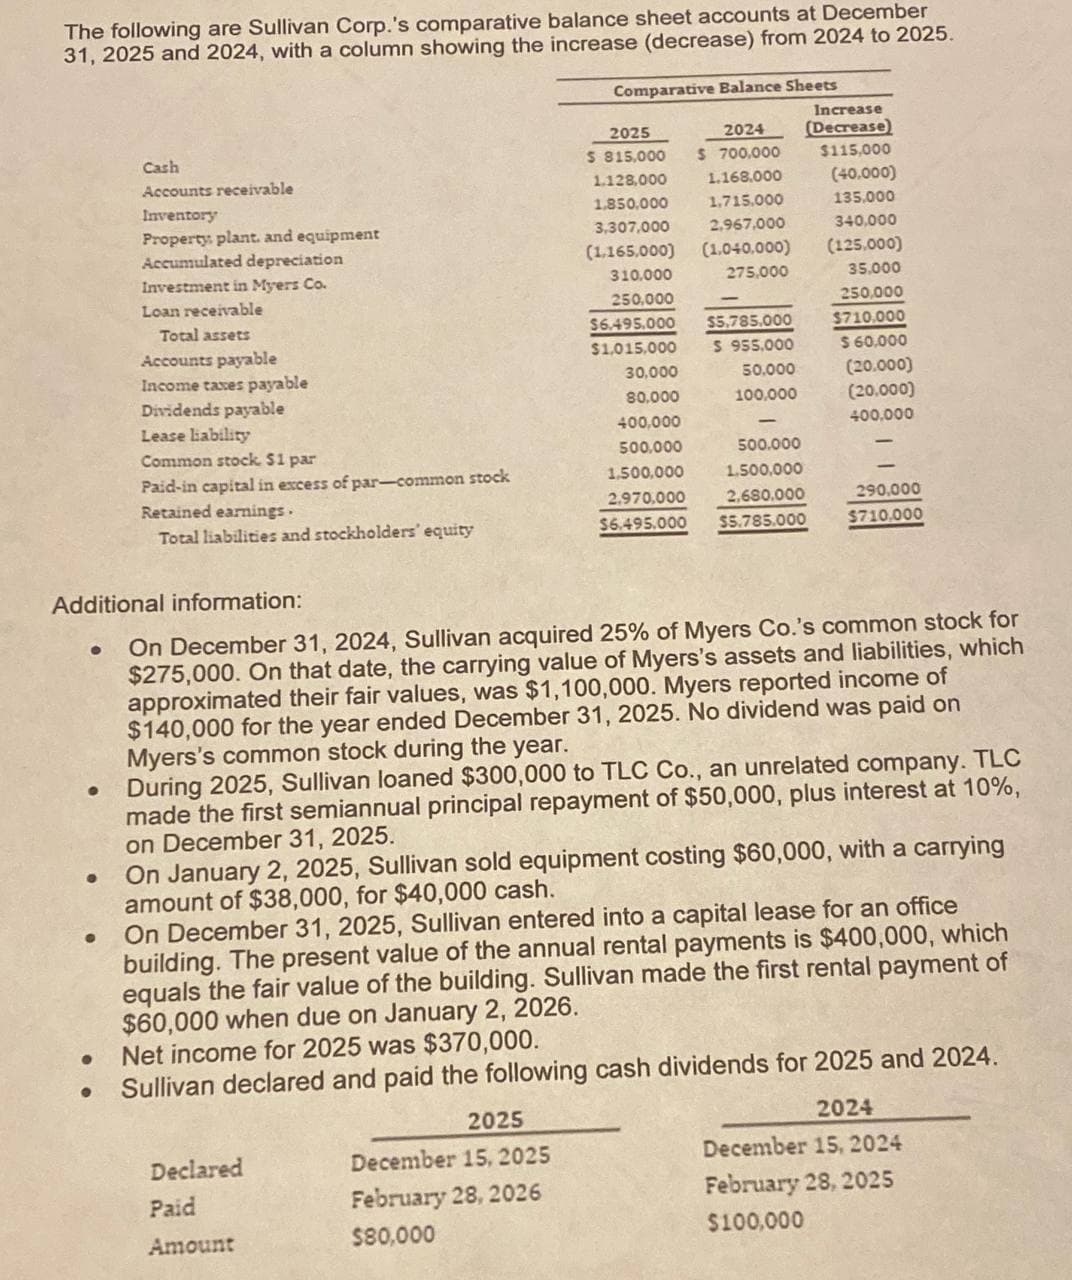 The following are Sullivan Corp.'s comparative balance sheet accounts at December
31, 2025 and 2024, with a column showing the increase (decrease) from 2024 to 2025.
Comparative Balance Sheets
2025
Cash
Accounts receivable
Inventory
Property: plant, and equipment
Accumulated depreciation
Investment in Myers Co.
Loan receivable
Total assets
Accounts payable
Income taxes payable
$ 815,000
1.128,000
2024
$700,000
1.168.000
Increase
(Decrease)
$115,000
(40,000)
1,850,000
1,715.000
135,000
3,307,000
2,967,000
340,000
(1,165,000)
(1,040,000)
(125,000)
310,000
275,000
35,000
250,000
$6.495.000
$5,785,000
250,000
$710,000
$1,015,000
$ 955,000
$ 60,000
30,000
50.000
(20.000)
Dividends payable
80,000
100,000
(20,000)
Lease liability
400,000
400,000
Common stock. $1 par
500,000
500.000
Paid-in capital in excess of par-common stock
1,500,000
1,500,000
Retained earnings.
2.970,000
2,680.000
290,000
Total liabilities and stockholders' equity
$6.495.000
$5.785.000
$710,000
Additional information:
0
•
On December 31, 2024, Sullivan acquired 25% of Myers Co.'s common stock for
$275,000. On that date, the carrying value of Myers's assets and liabilities, which
approximated their fair values, was $1,100,000. Myers reported income of
$140,000 for the year ended December 31, 2025. No dividend was paid on
Myers's common stock during the year.
During 2025, Sullivan loaned $300,000 to TLC Co., an unrelated company. TLC
made the first semiannual principal repayment of $50,000, plus interest at 10%,
on December 31, 2025.
On January 2, 2025, Sullivan sold equipment costing $60,000, with a carrying
amount of $38,000, for $40,000 cash.
On December 31, 2025, Sullivan entered into a capital lease for an office
building. The present value of the annual rental payments is $400,000, which
equals the fair value of the building. Sullivan made the first rental payment of
$60,000 when due on January 2, 2026.
Net income for 2025 was $370,000.
Sullivan declared and paid the following cash dividends for 2025 and 2024.
2024
2025
Declared
December 15, 2025
Paid
February 28, 2026
Amount
$80,000
December 15, 2024
February 28, 2025
$100,000